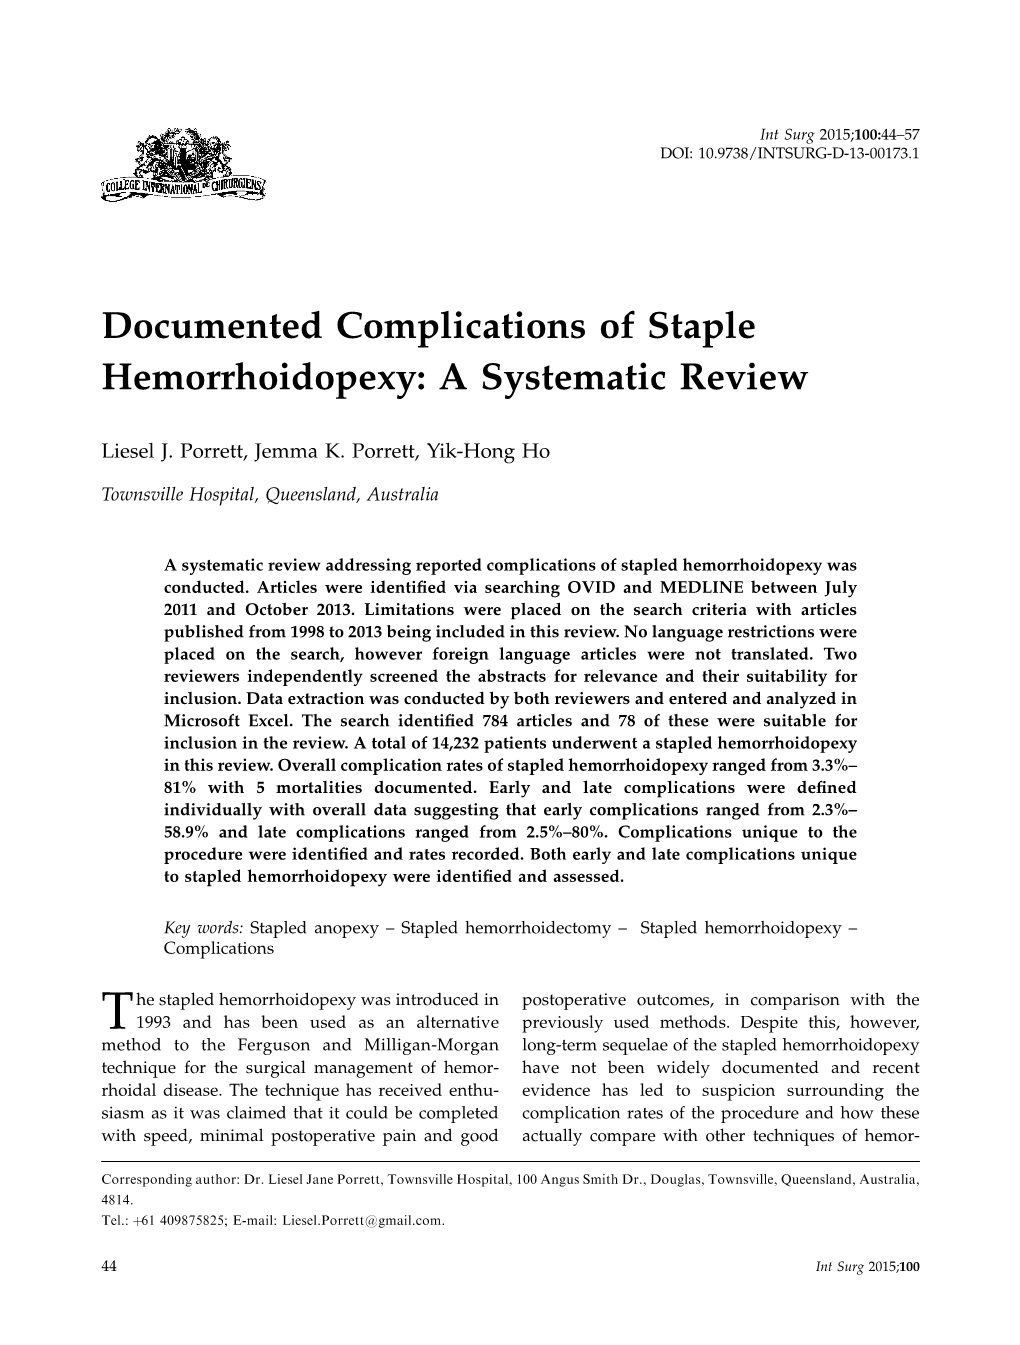 Documented Complications of Staple Hemorrhoidopexy: a Systematic Review